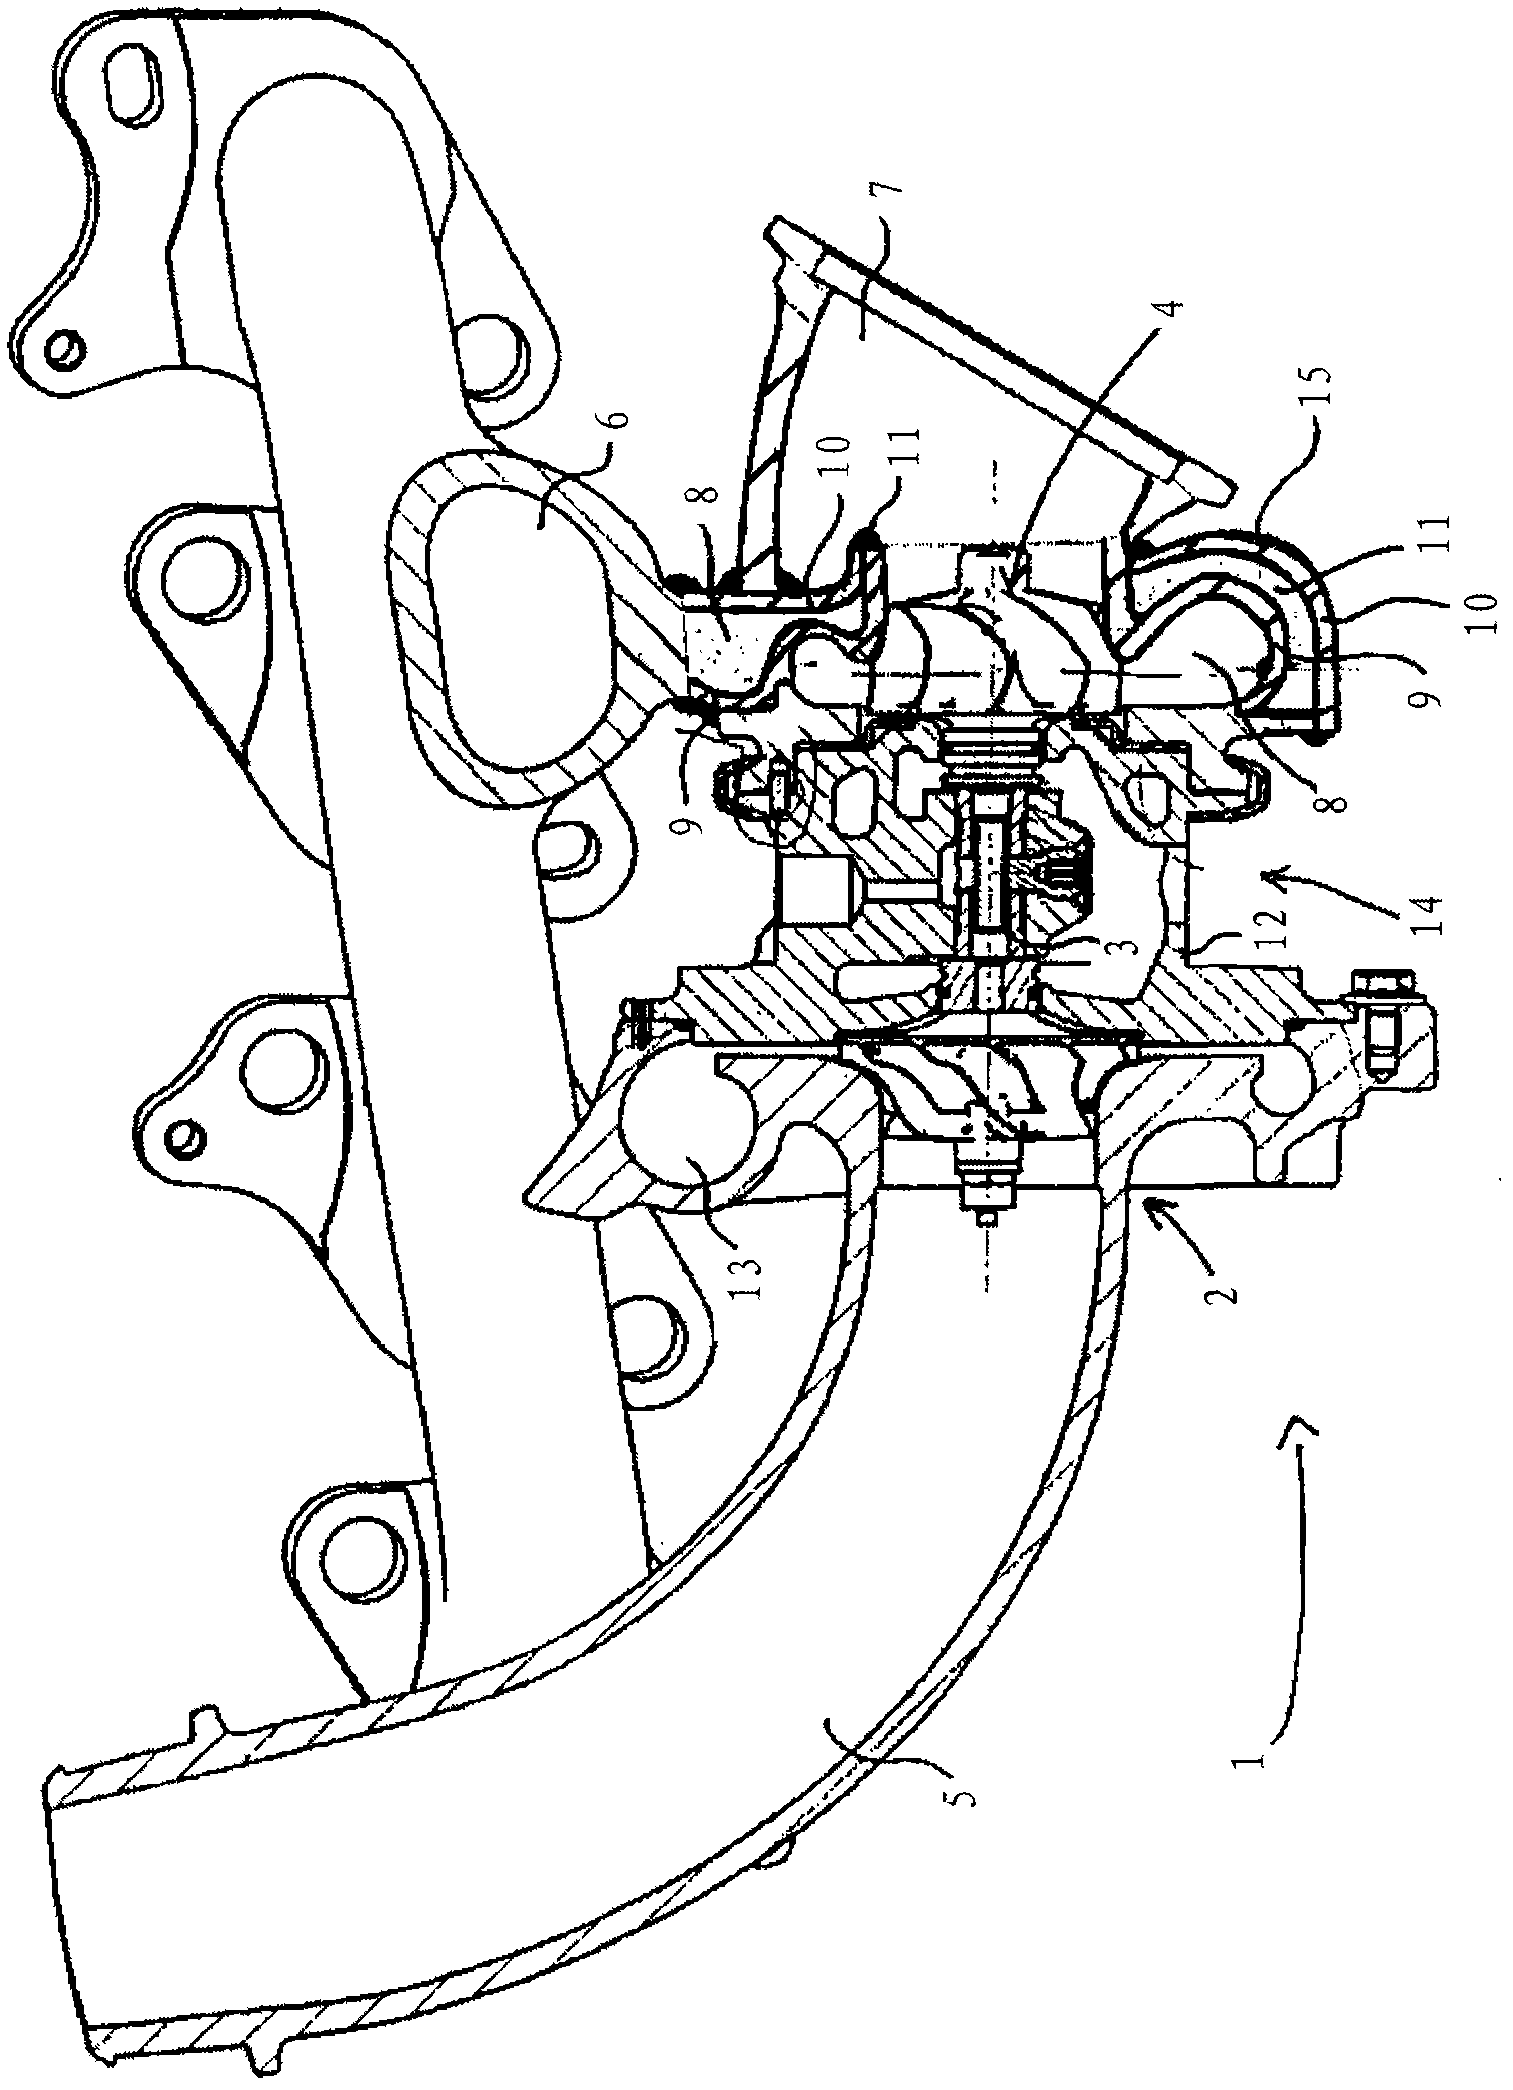 Fluid cooling system of a combustion engine charged by a turbocharger and method for cooling a turbine housing of a turbocharger